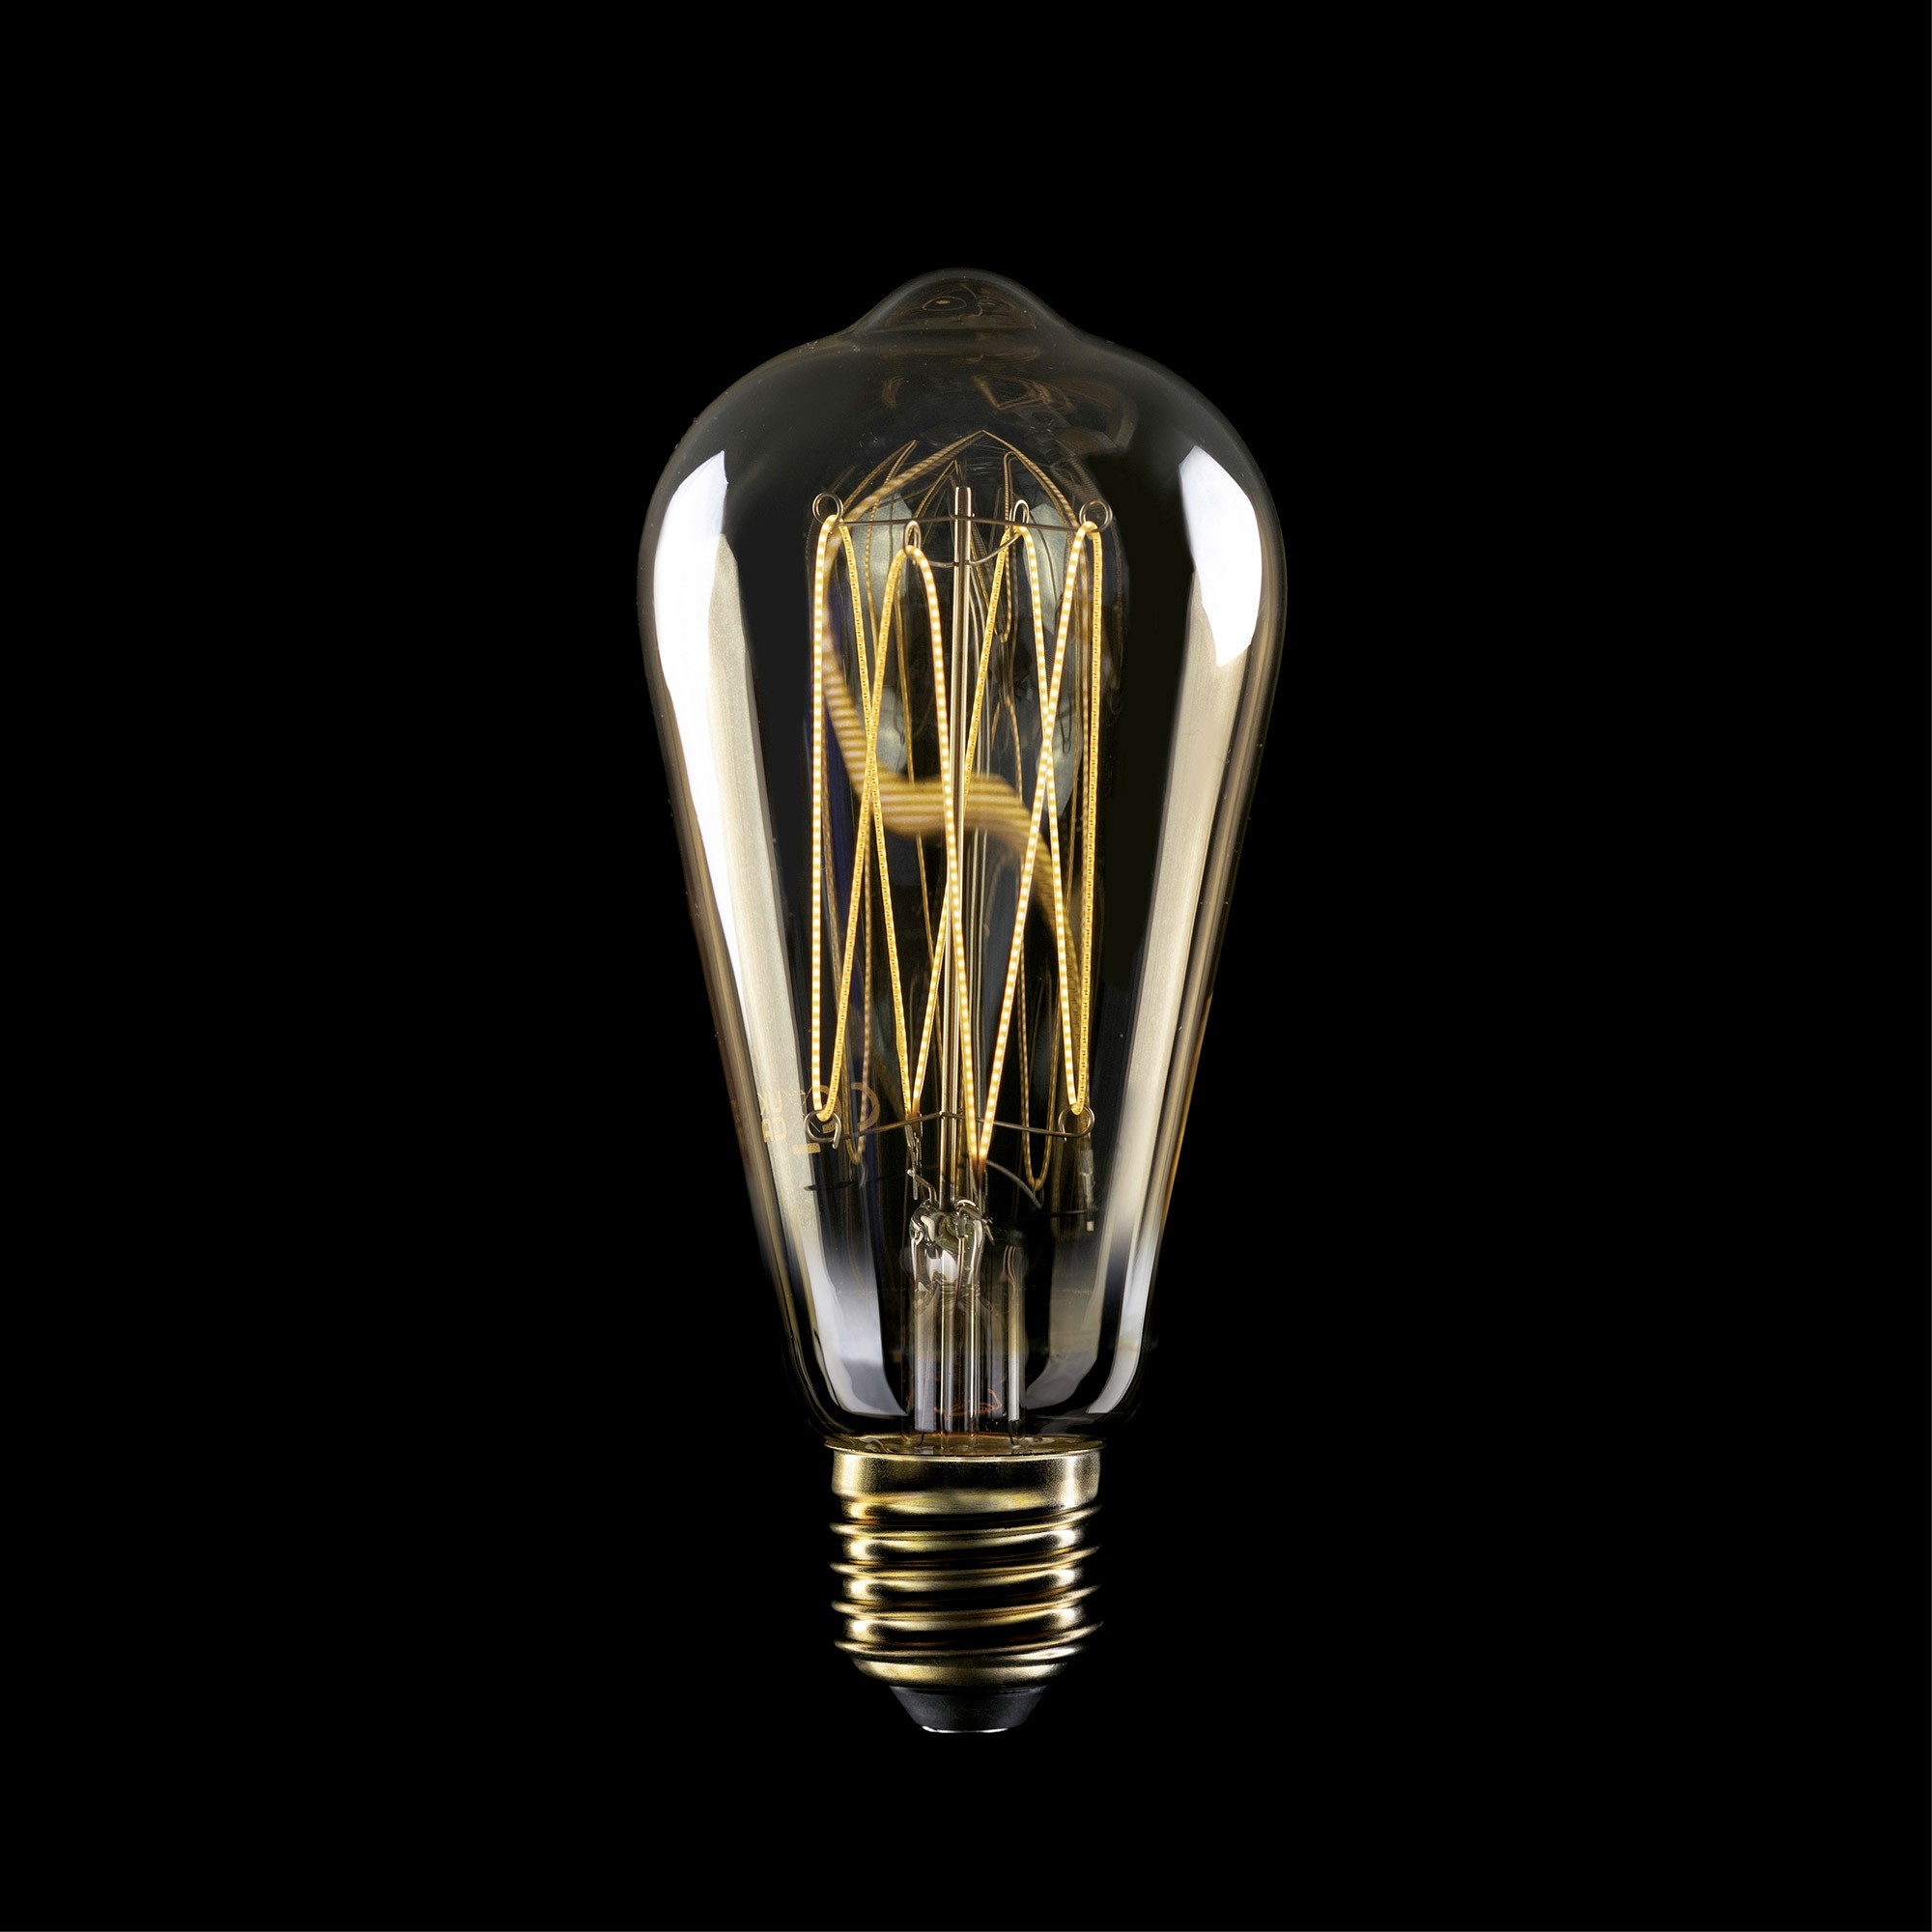 C54 - LED Light Bulb ST64, E27, 7W, 2700K, 640Lm, with extra slim vertical filament, golden glass